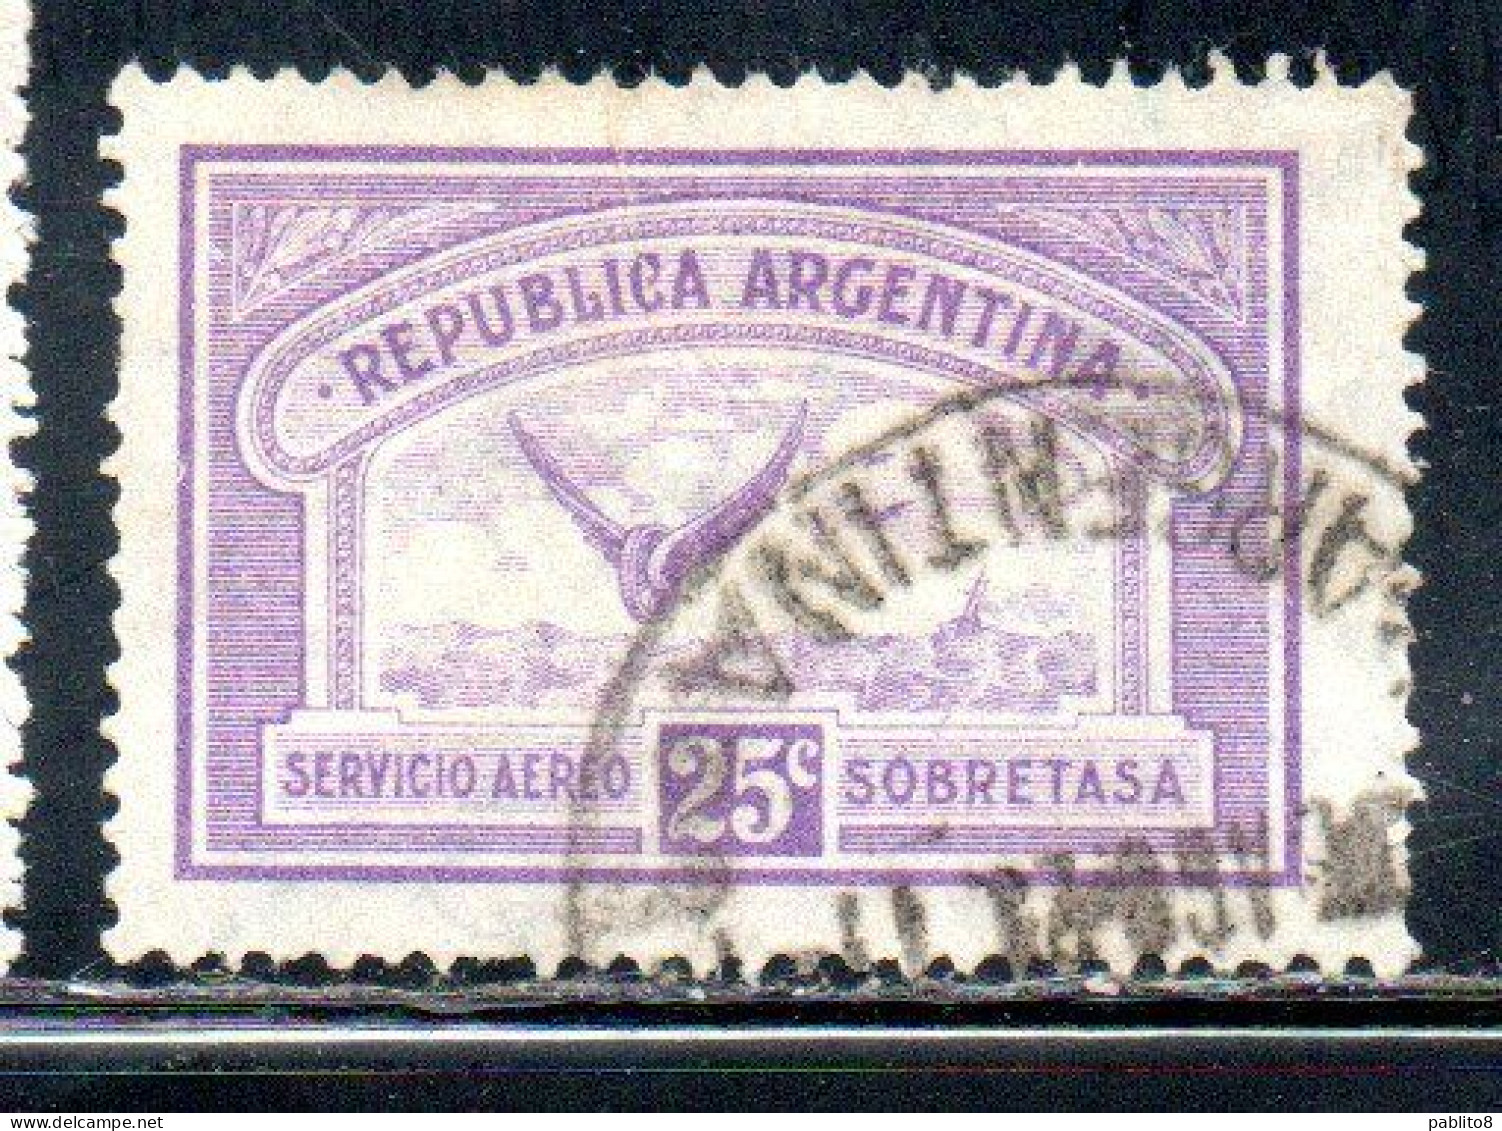 ARGENTINA 1928 AIR POST MAIL CORREO AEREO AIRMAIL WING CROSS THE SEA 25c USED USADO OBLITERE' - Luftpost